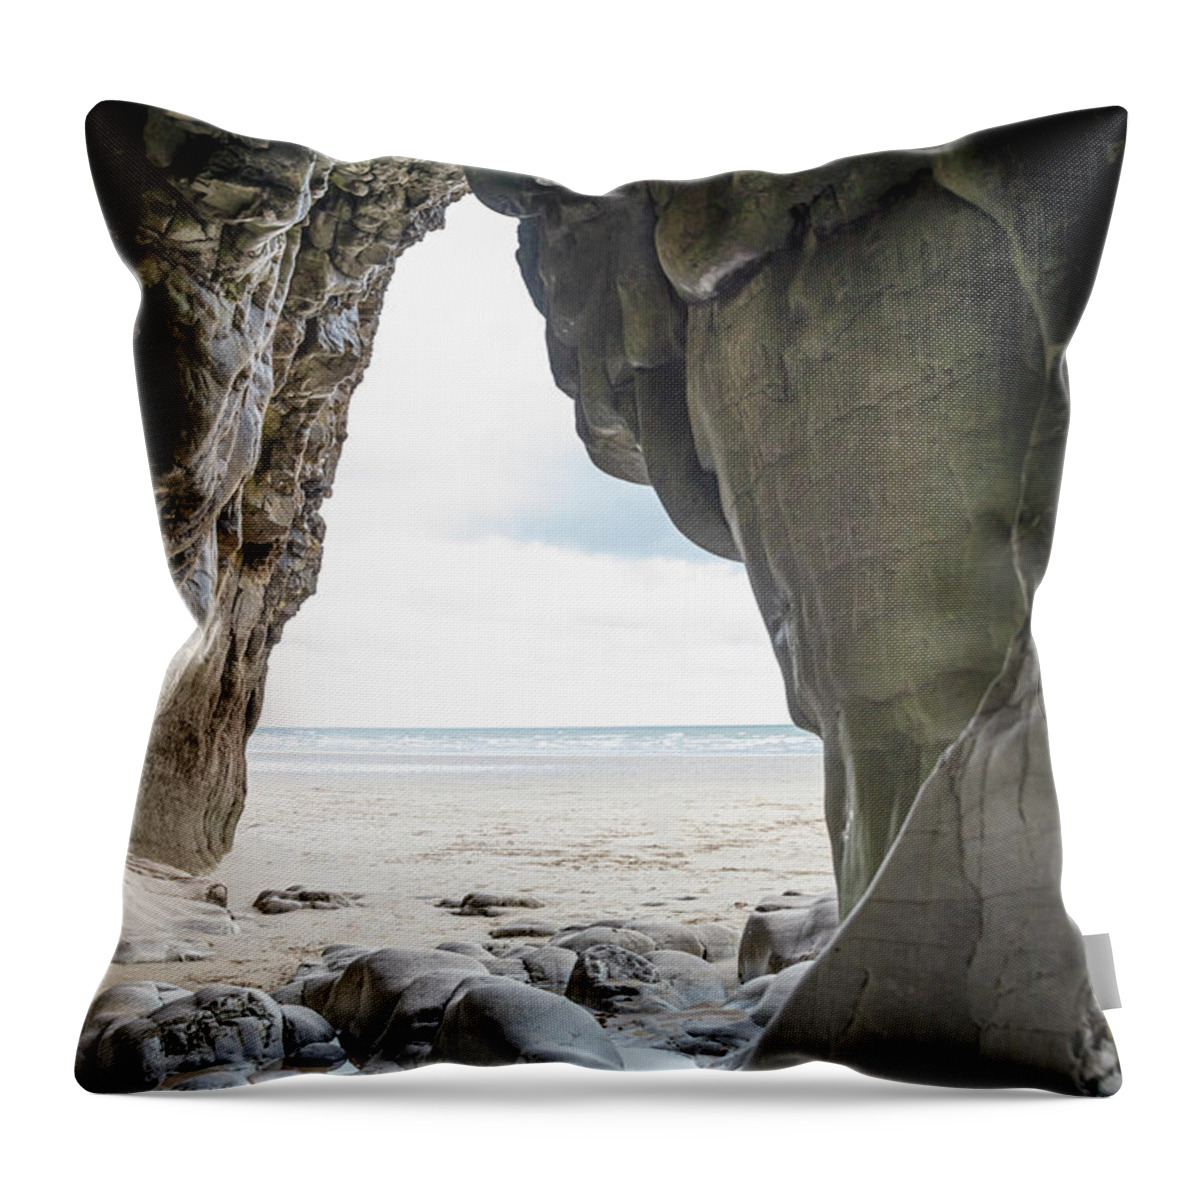 Cave Throw Pillow featuring the photograph Cave At Pendine Sands, Wales by Paul Thompson